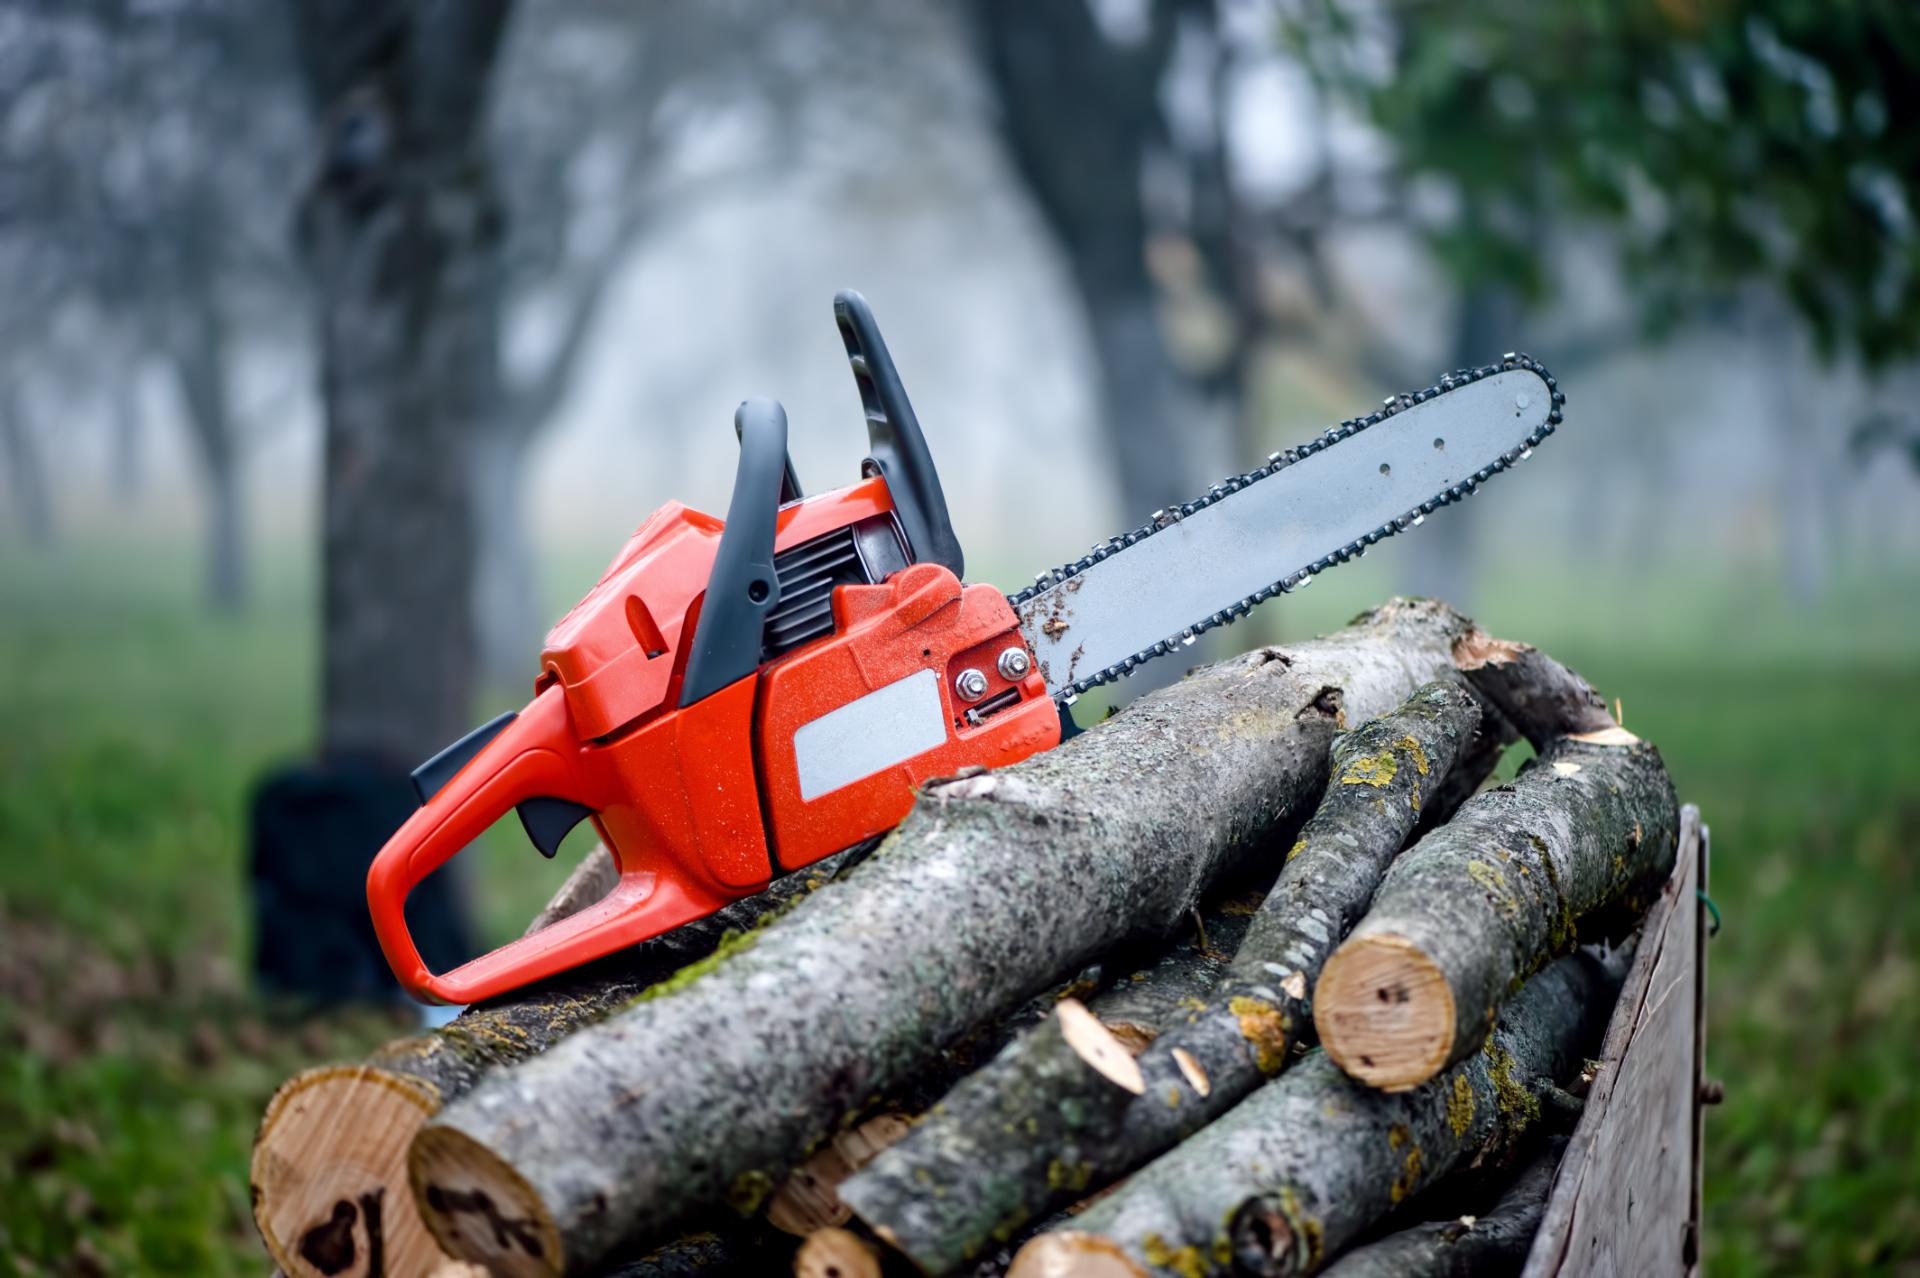 A chainsaw sitting on a pile of logs.